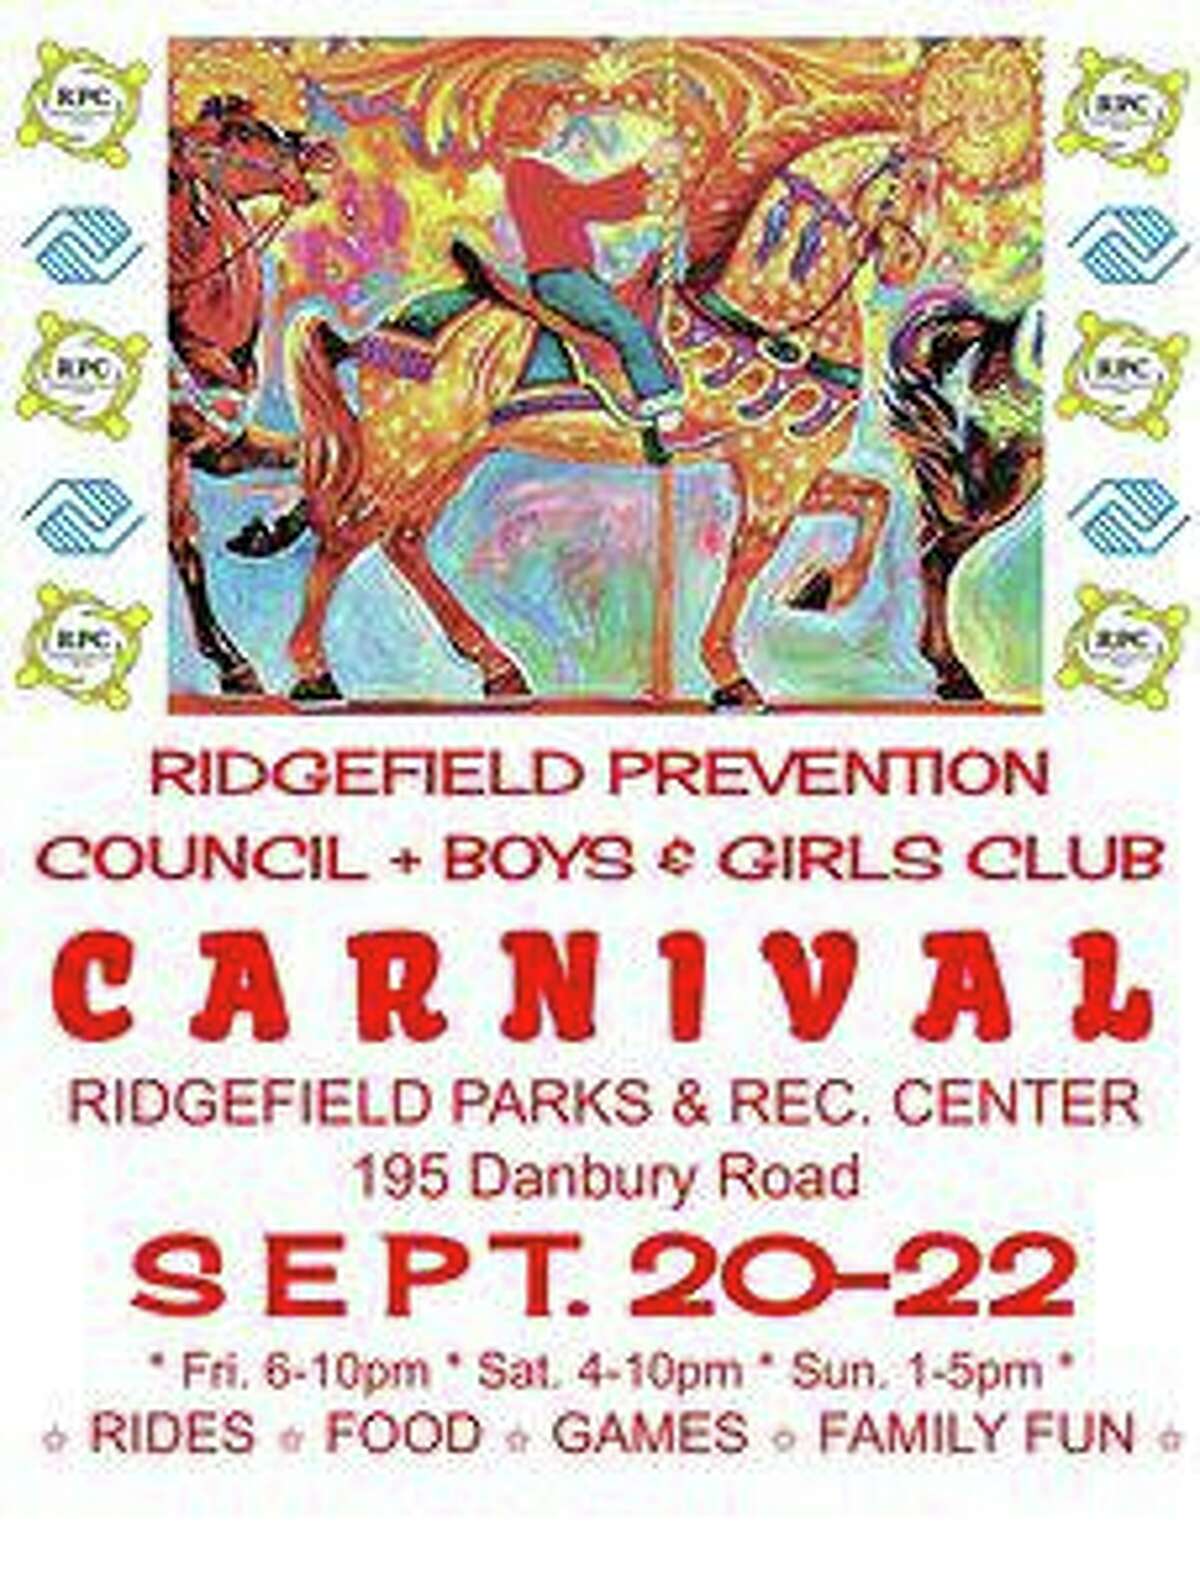 The Ridgefield Prevention Council (RPC) and the Ridgefield Boys & Girls Club will host the annual Ridgefield carnival Friday, Sept. 20 through Sunday, Sept. 22.